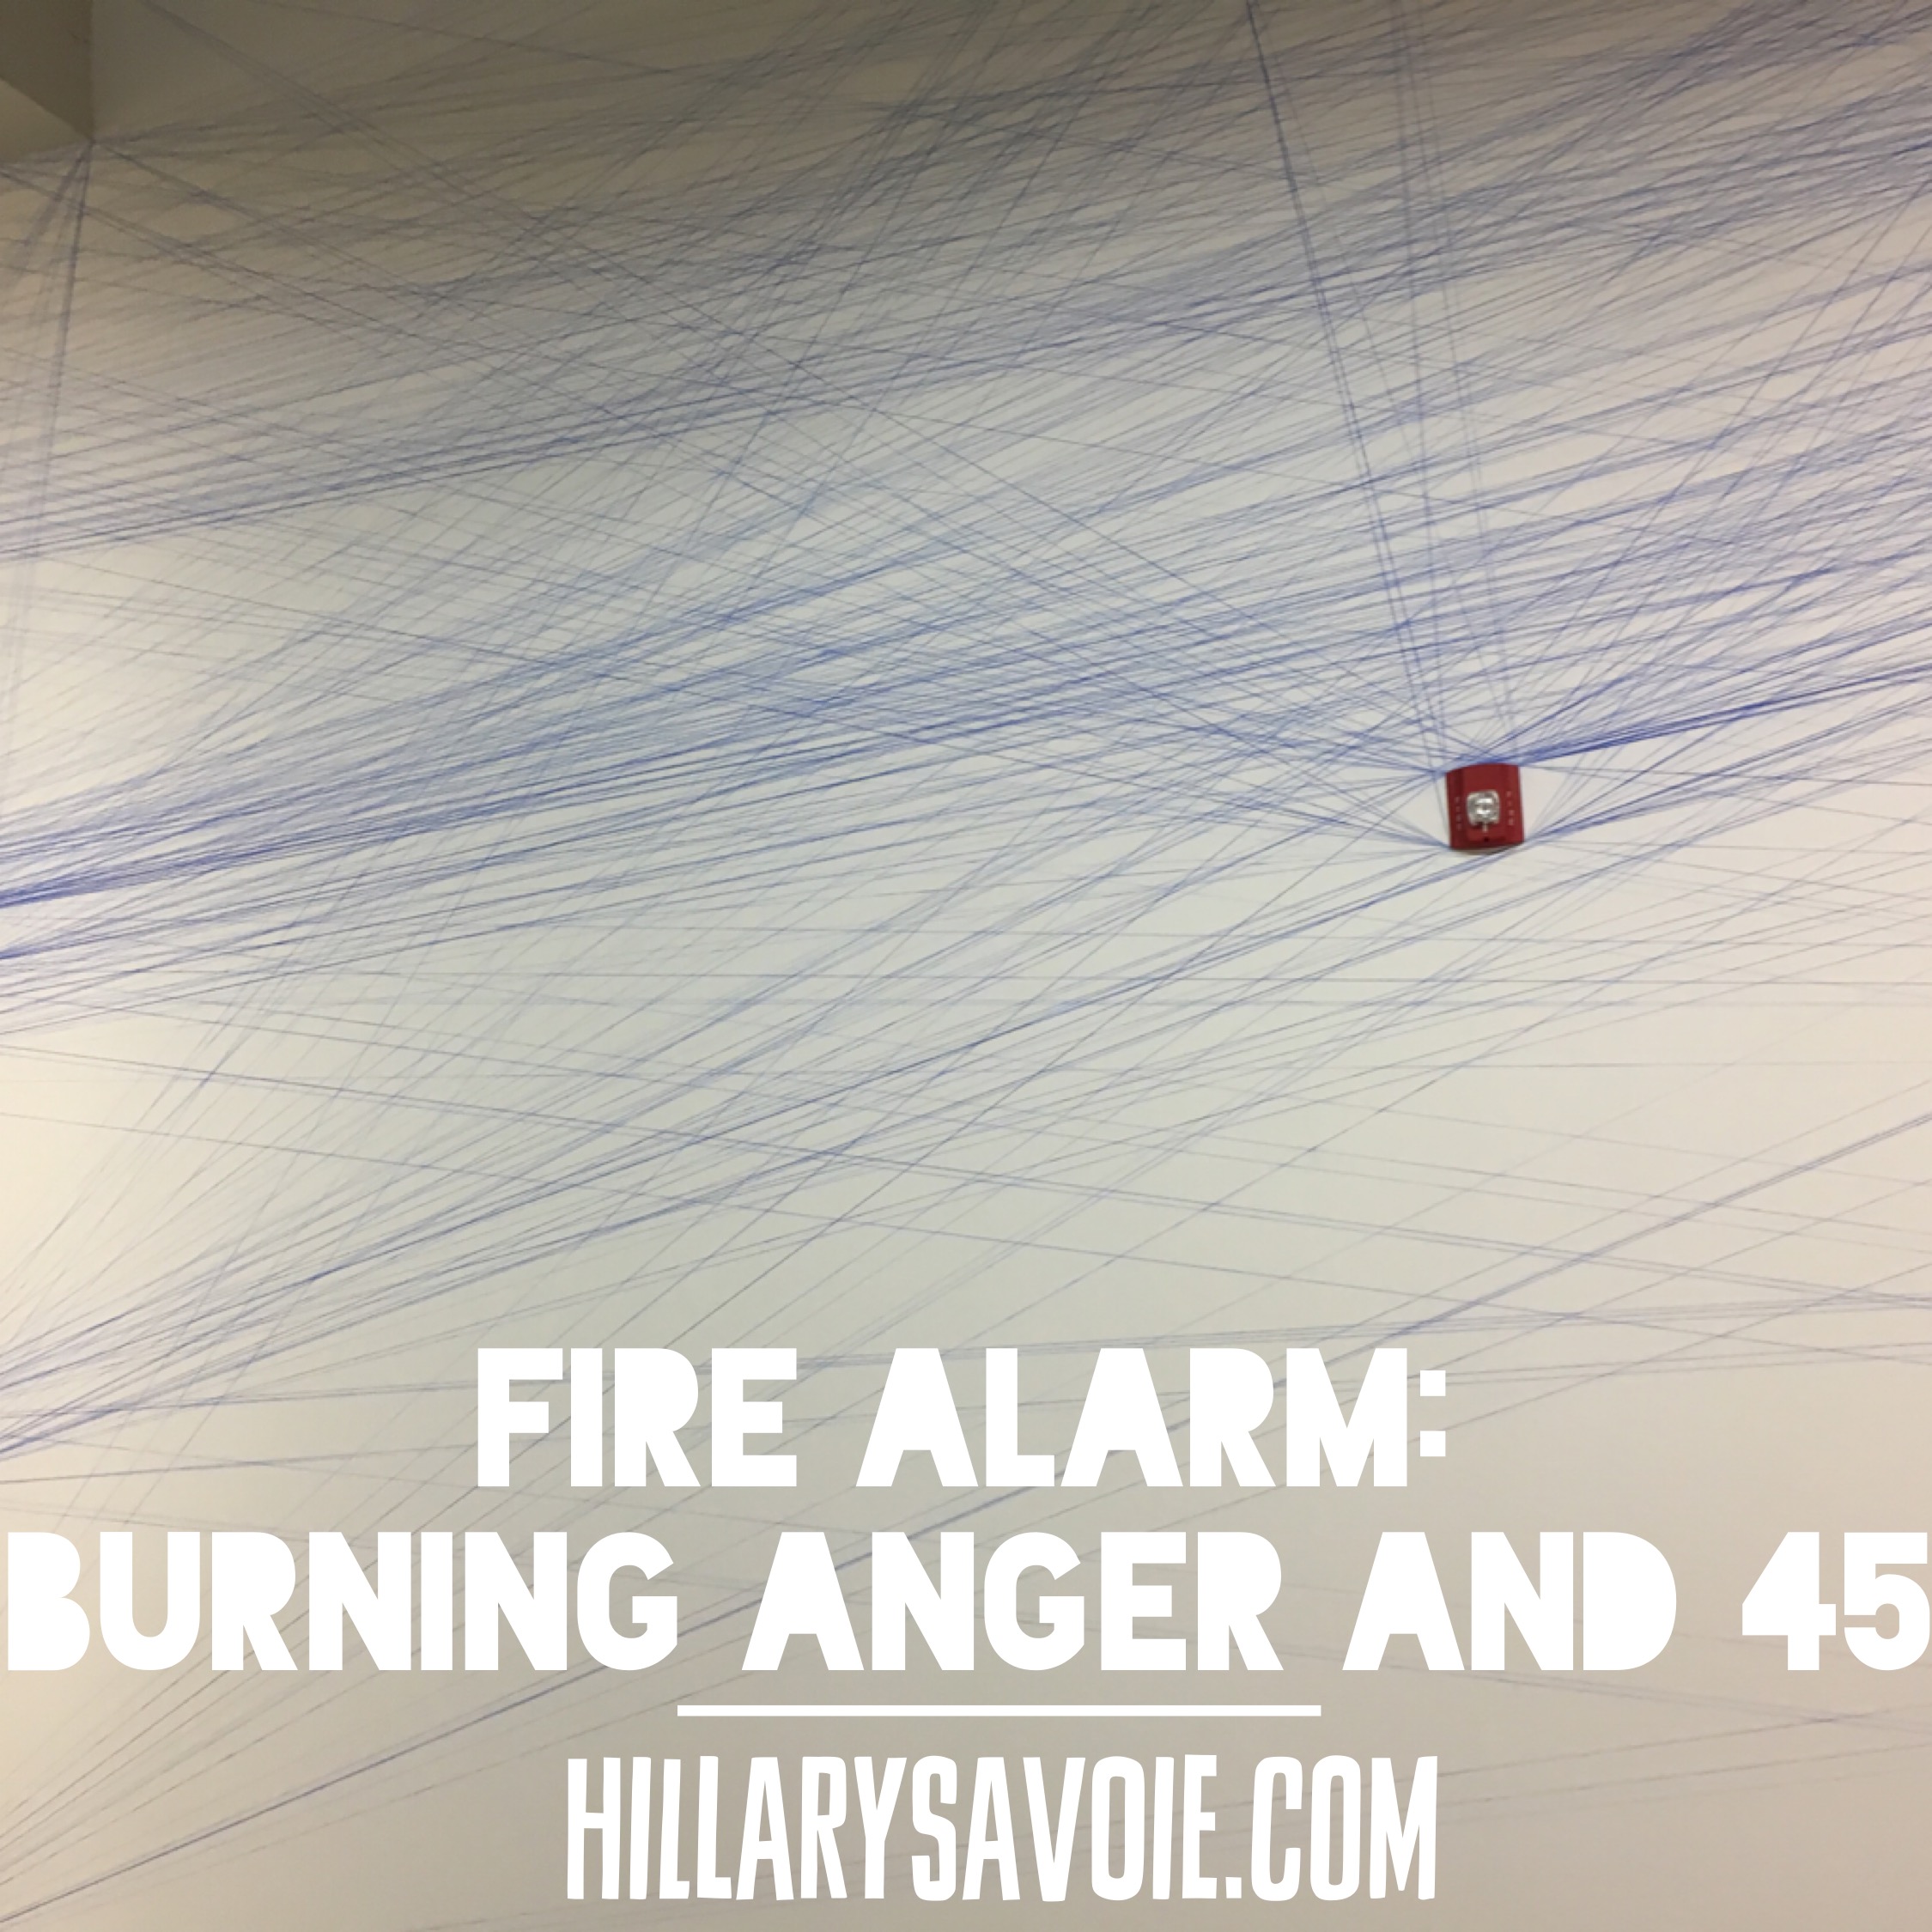 Fire Alarm: Burning Anger and 45